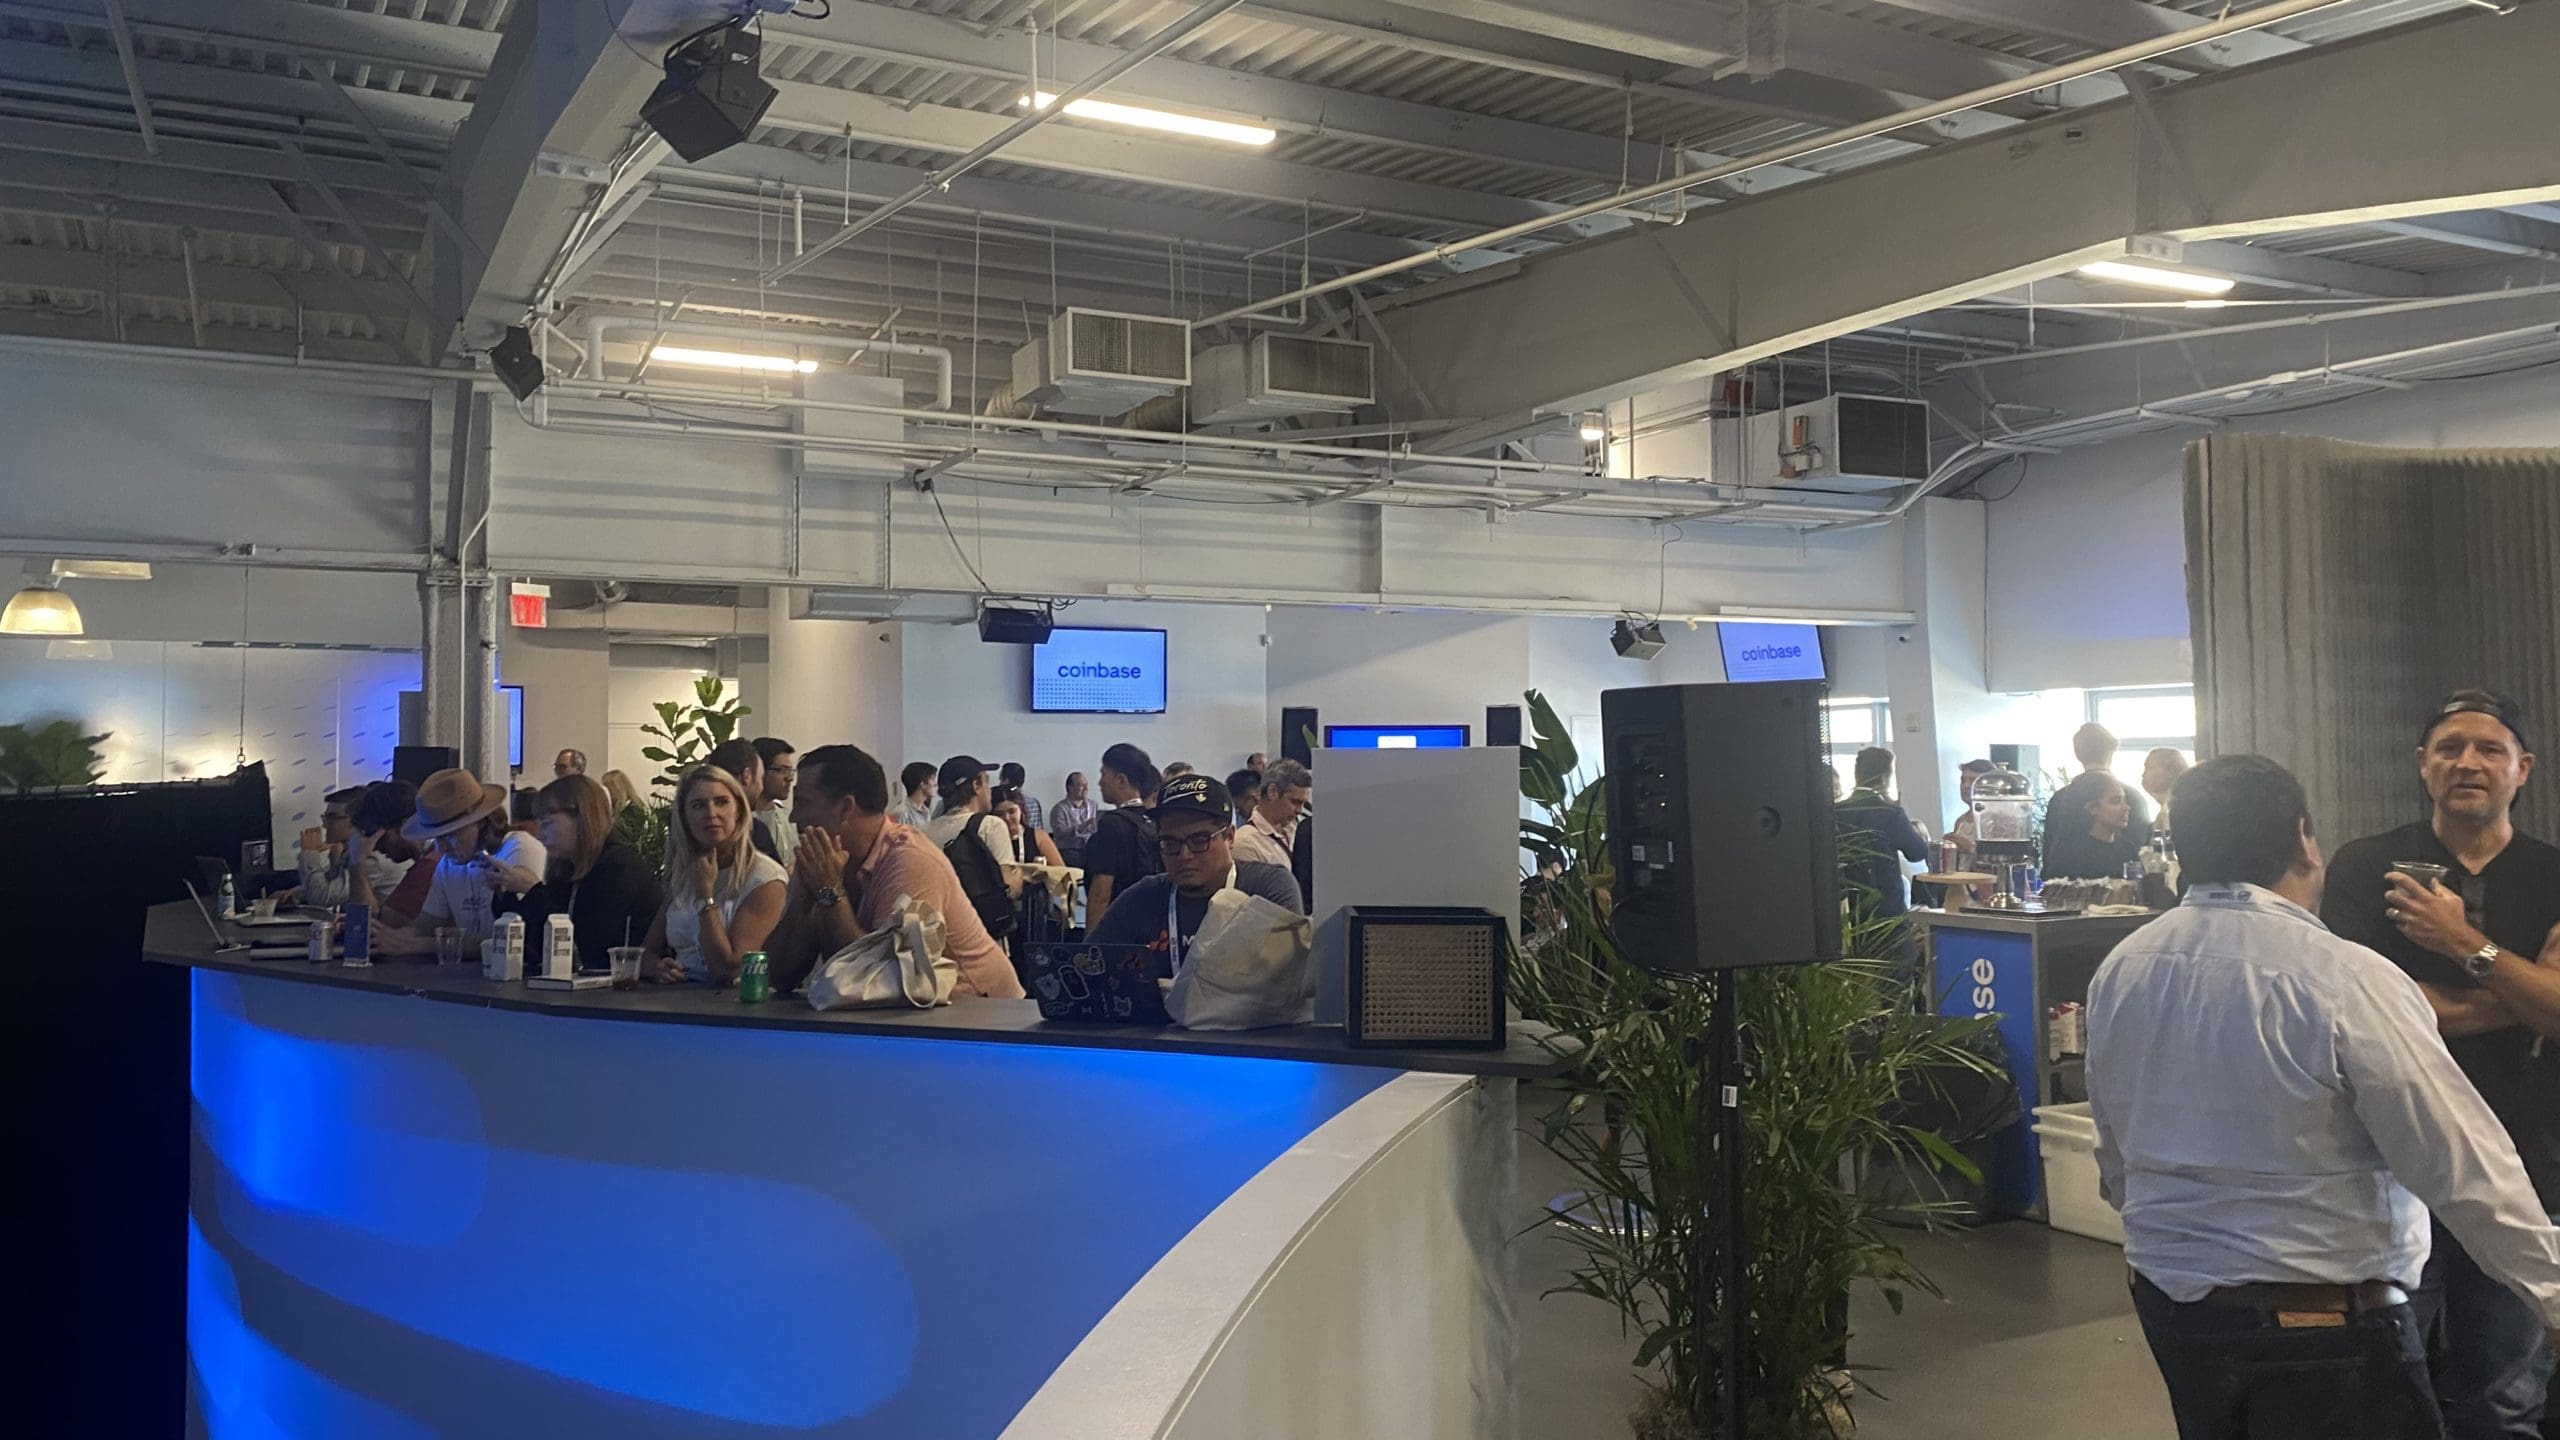 The Coinbase Lounge featured special announcemnts and a coffee bar